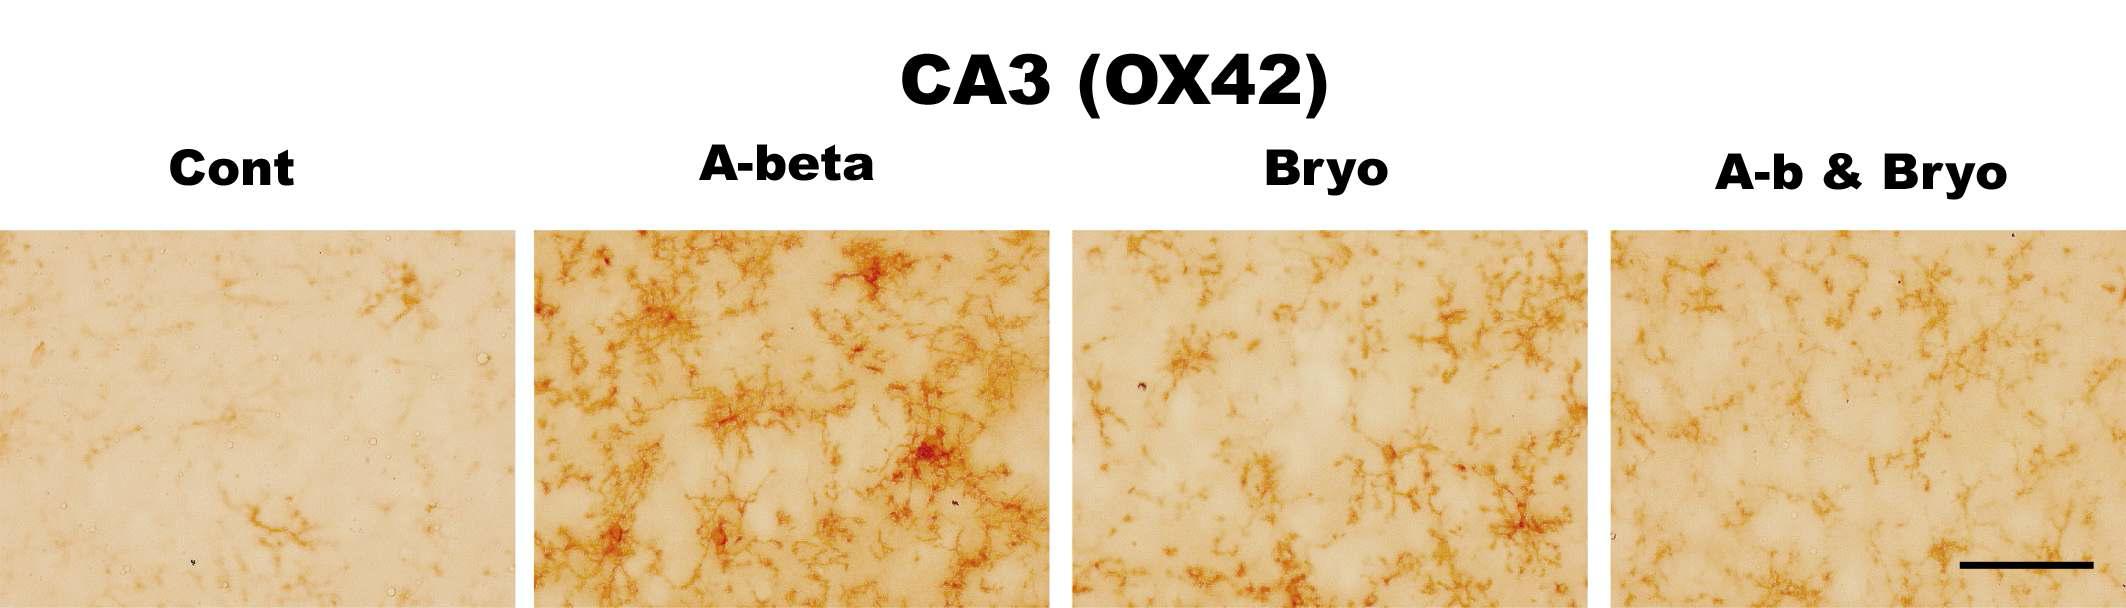 Effects of Bryostatin-1 on glial cell activation in CA3 hippocampus in rat. Bryostatin-1 significantly suppresses a microglia activation in CA3 of rat infused with amyloid beta. Intracerebro-ventricular infusion of Aβ and Bryostatin-1 was for four weeks using a micro-osmotic pump. Immuno- histochemistry (anti-CD11b) (scale bar, 50μm)(40Χ magnification)